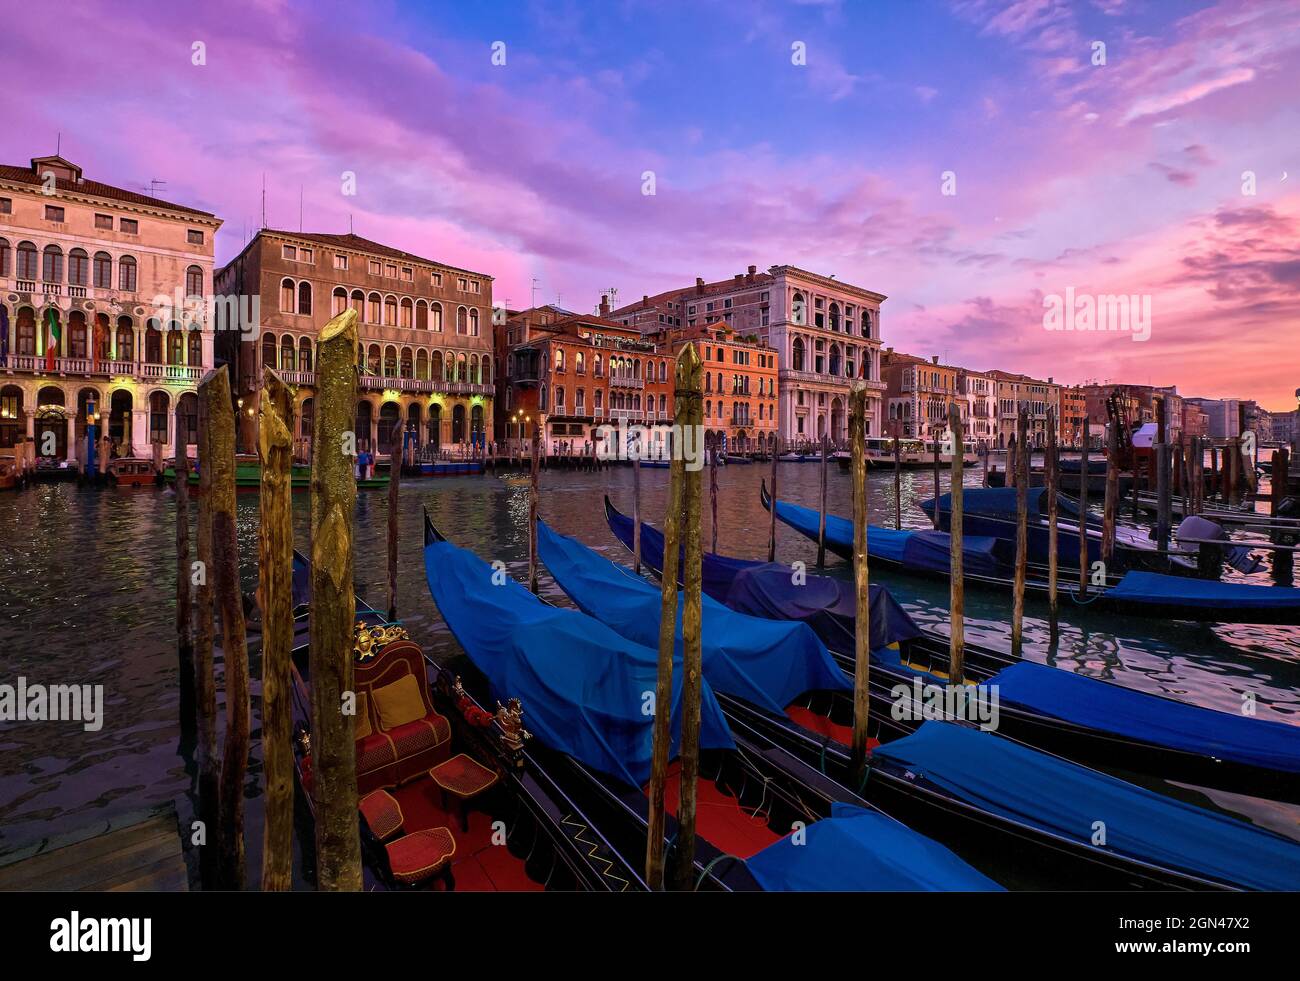 Sunset view of Grand Canal, Venice, Italy. UNESCO heritage city famous for its waterways and gondolas, beautiful sunset sky and evening lights Stock Photo